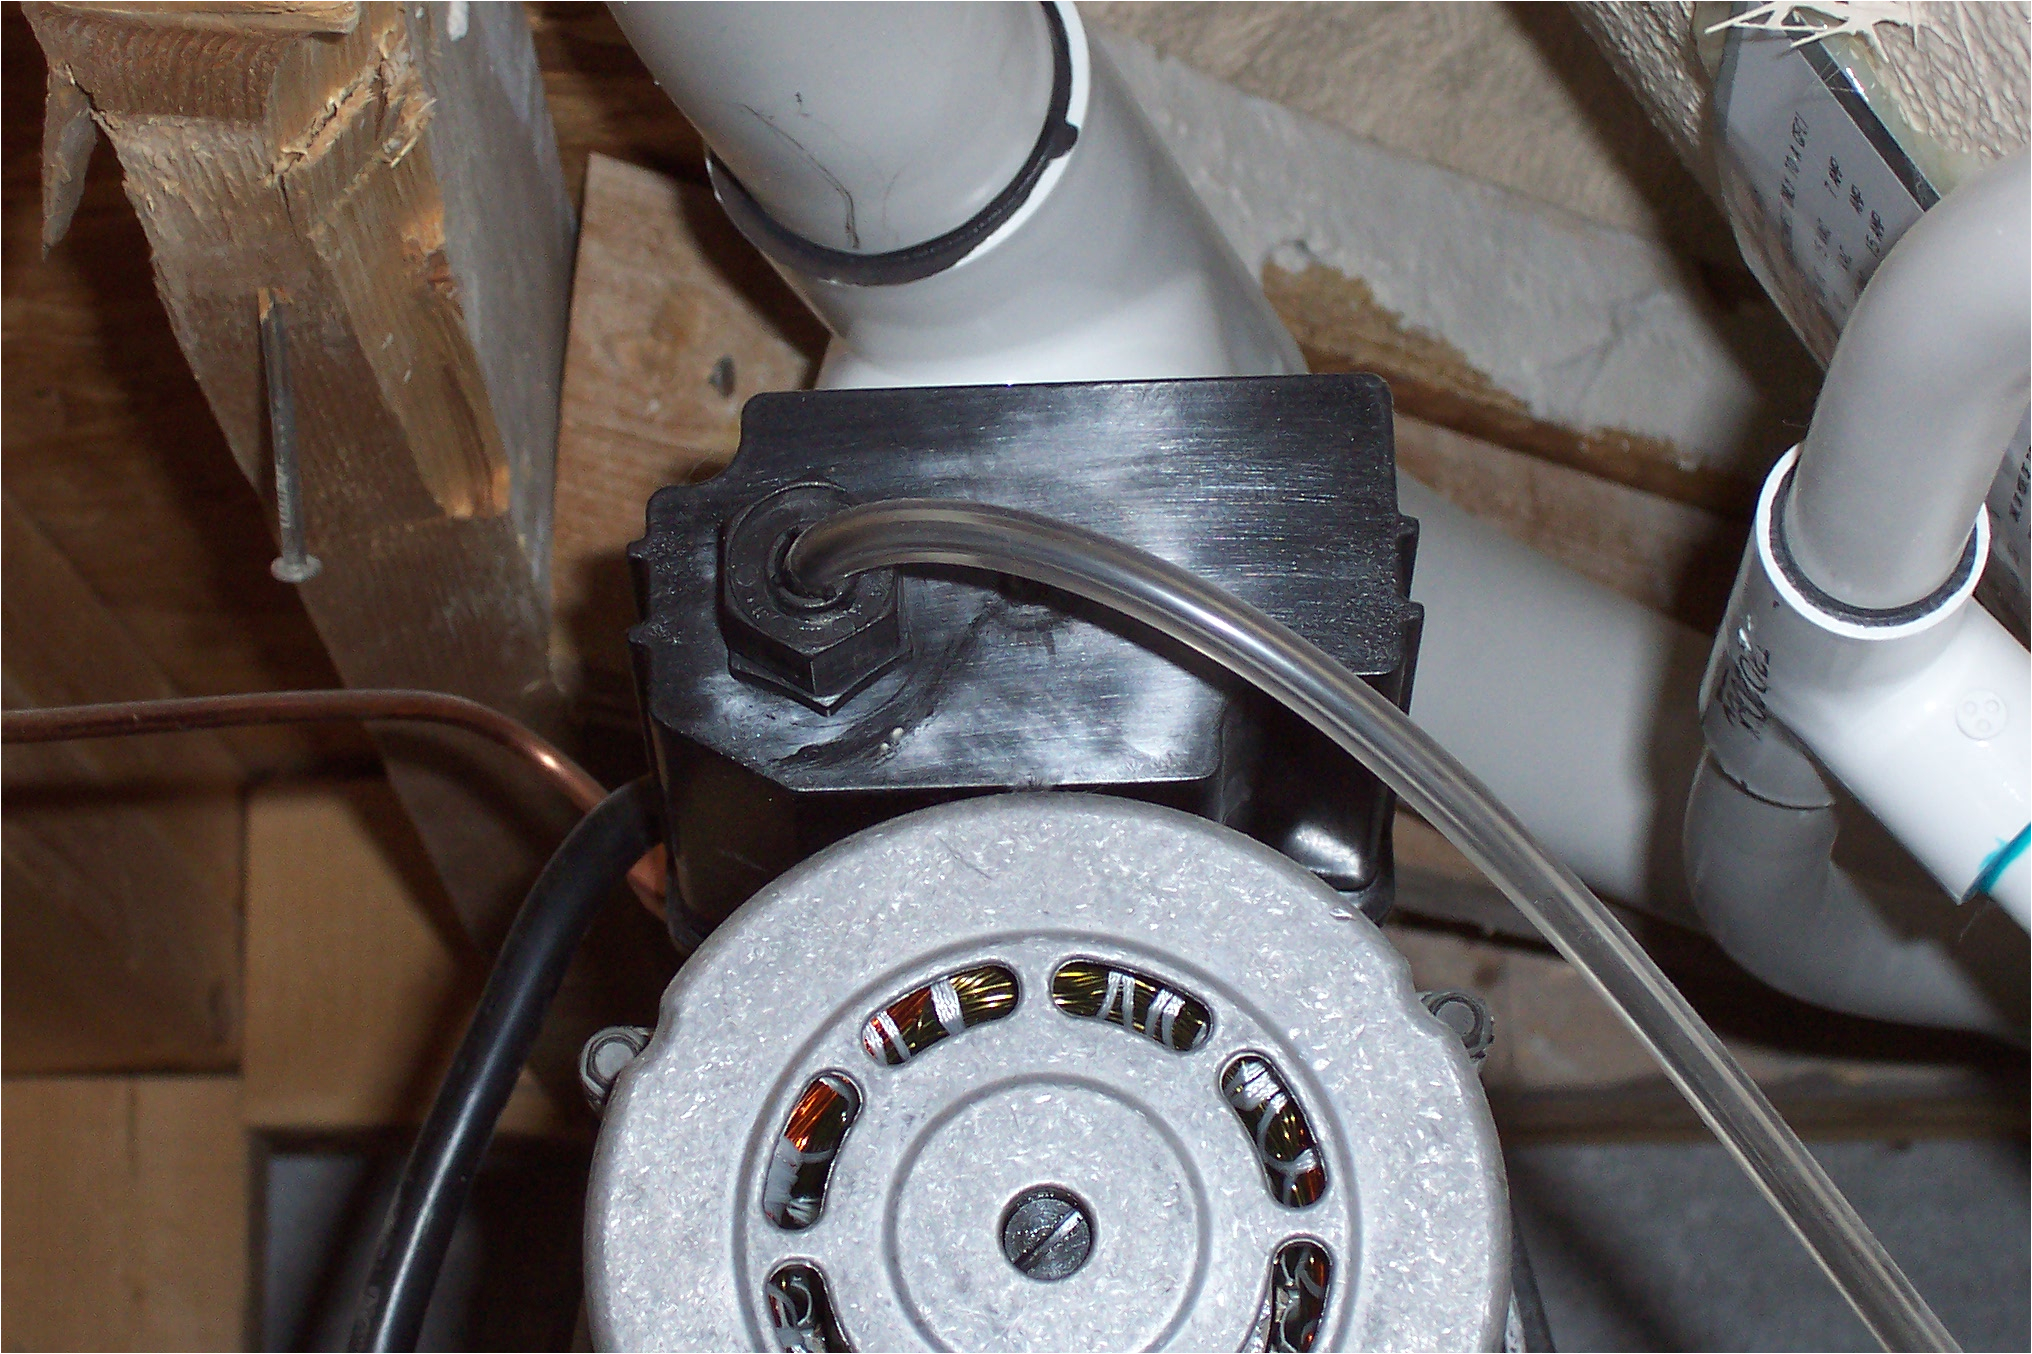 3yhrb pump on off switch rarely used 5 year old jacuzzi